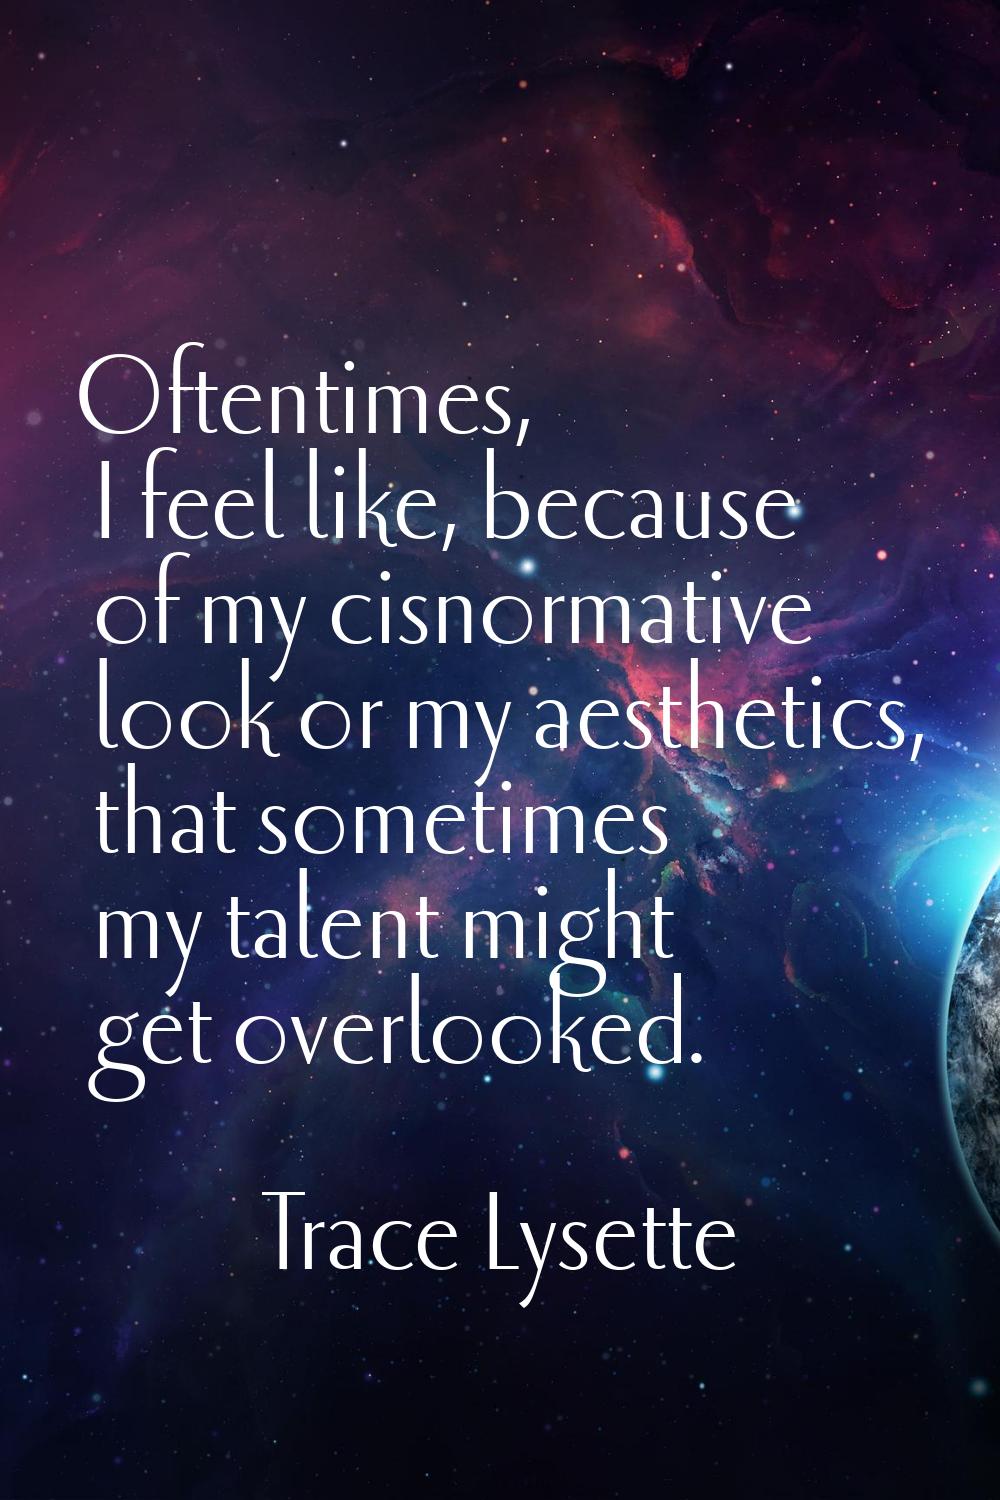 Oftentimes, I feel like, because of my cisnormative look or my aesthetics, that sometimes my talent